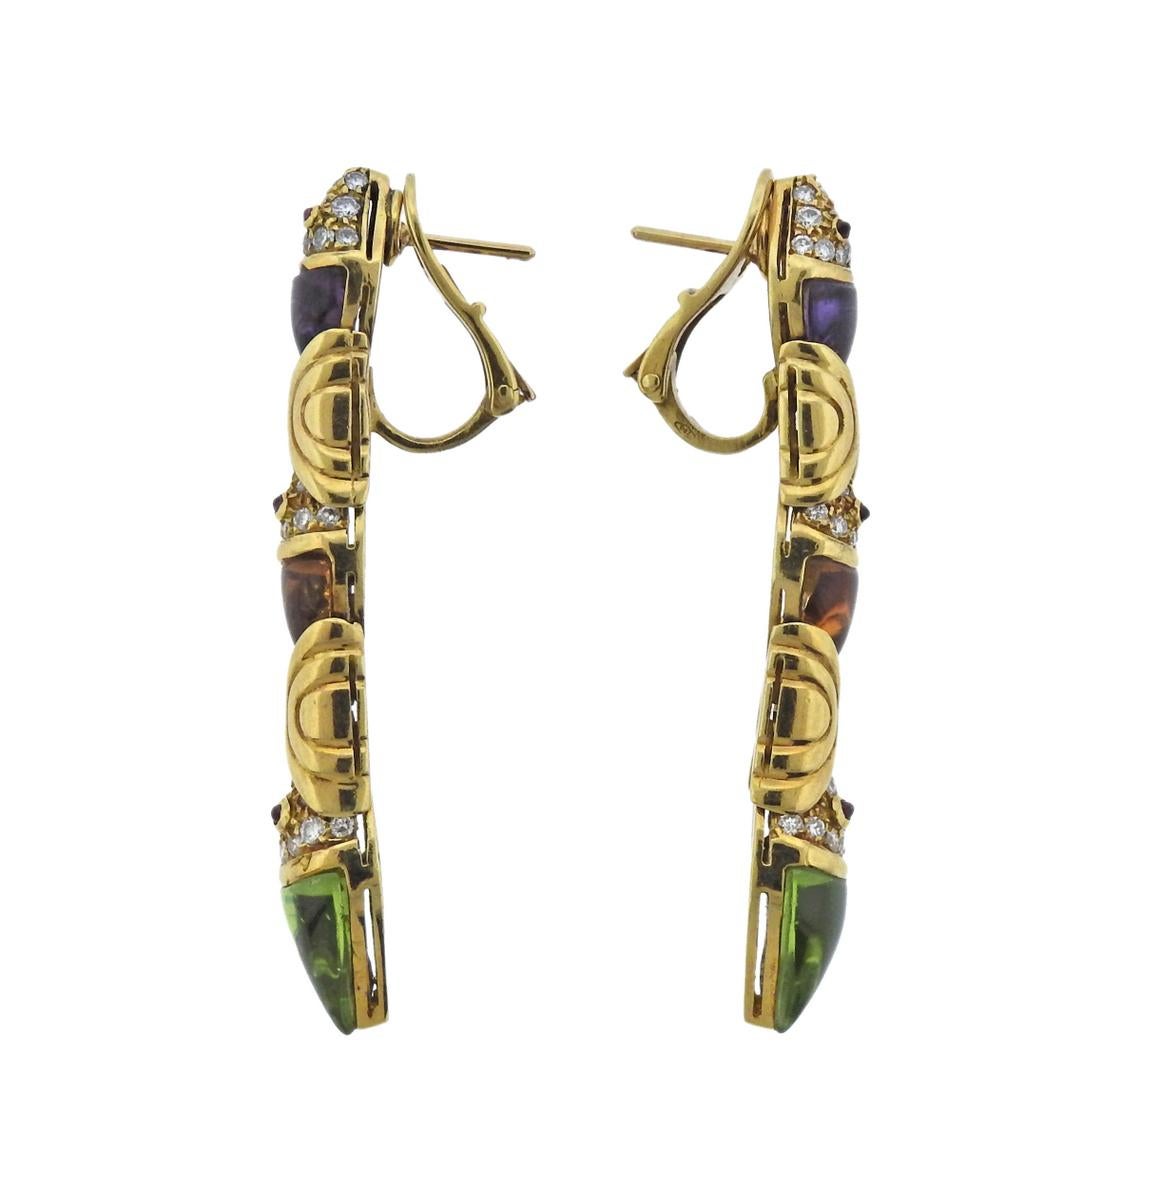 Pair of 18k yellow gold drop earrings, crafted by Bvlgari, decorated with citrine, amethyst and peridot gemstone, adorned with approx. 0.80ctw in G/VS diamonds. Earrings are 50mm x 10mm and weigh 23.2 grams. Marked Bvlgari, 750, BA9507.